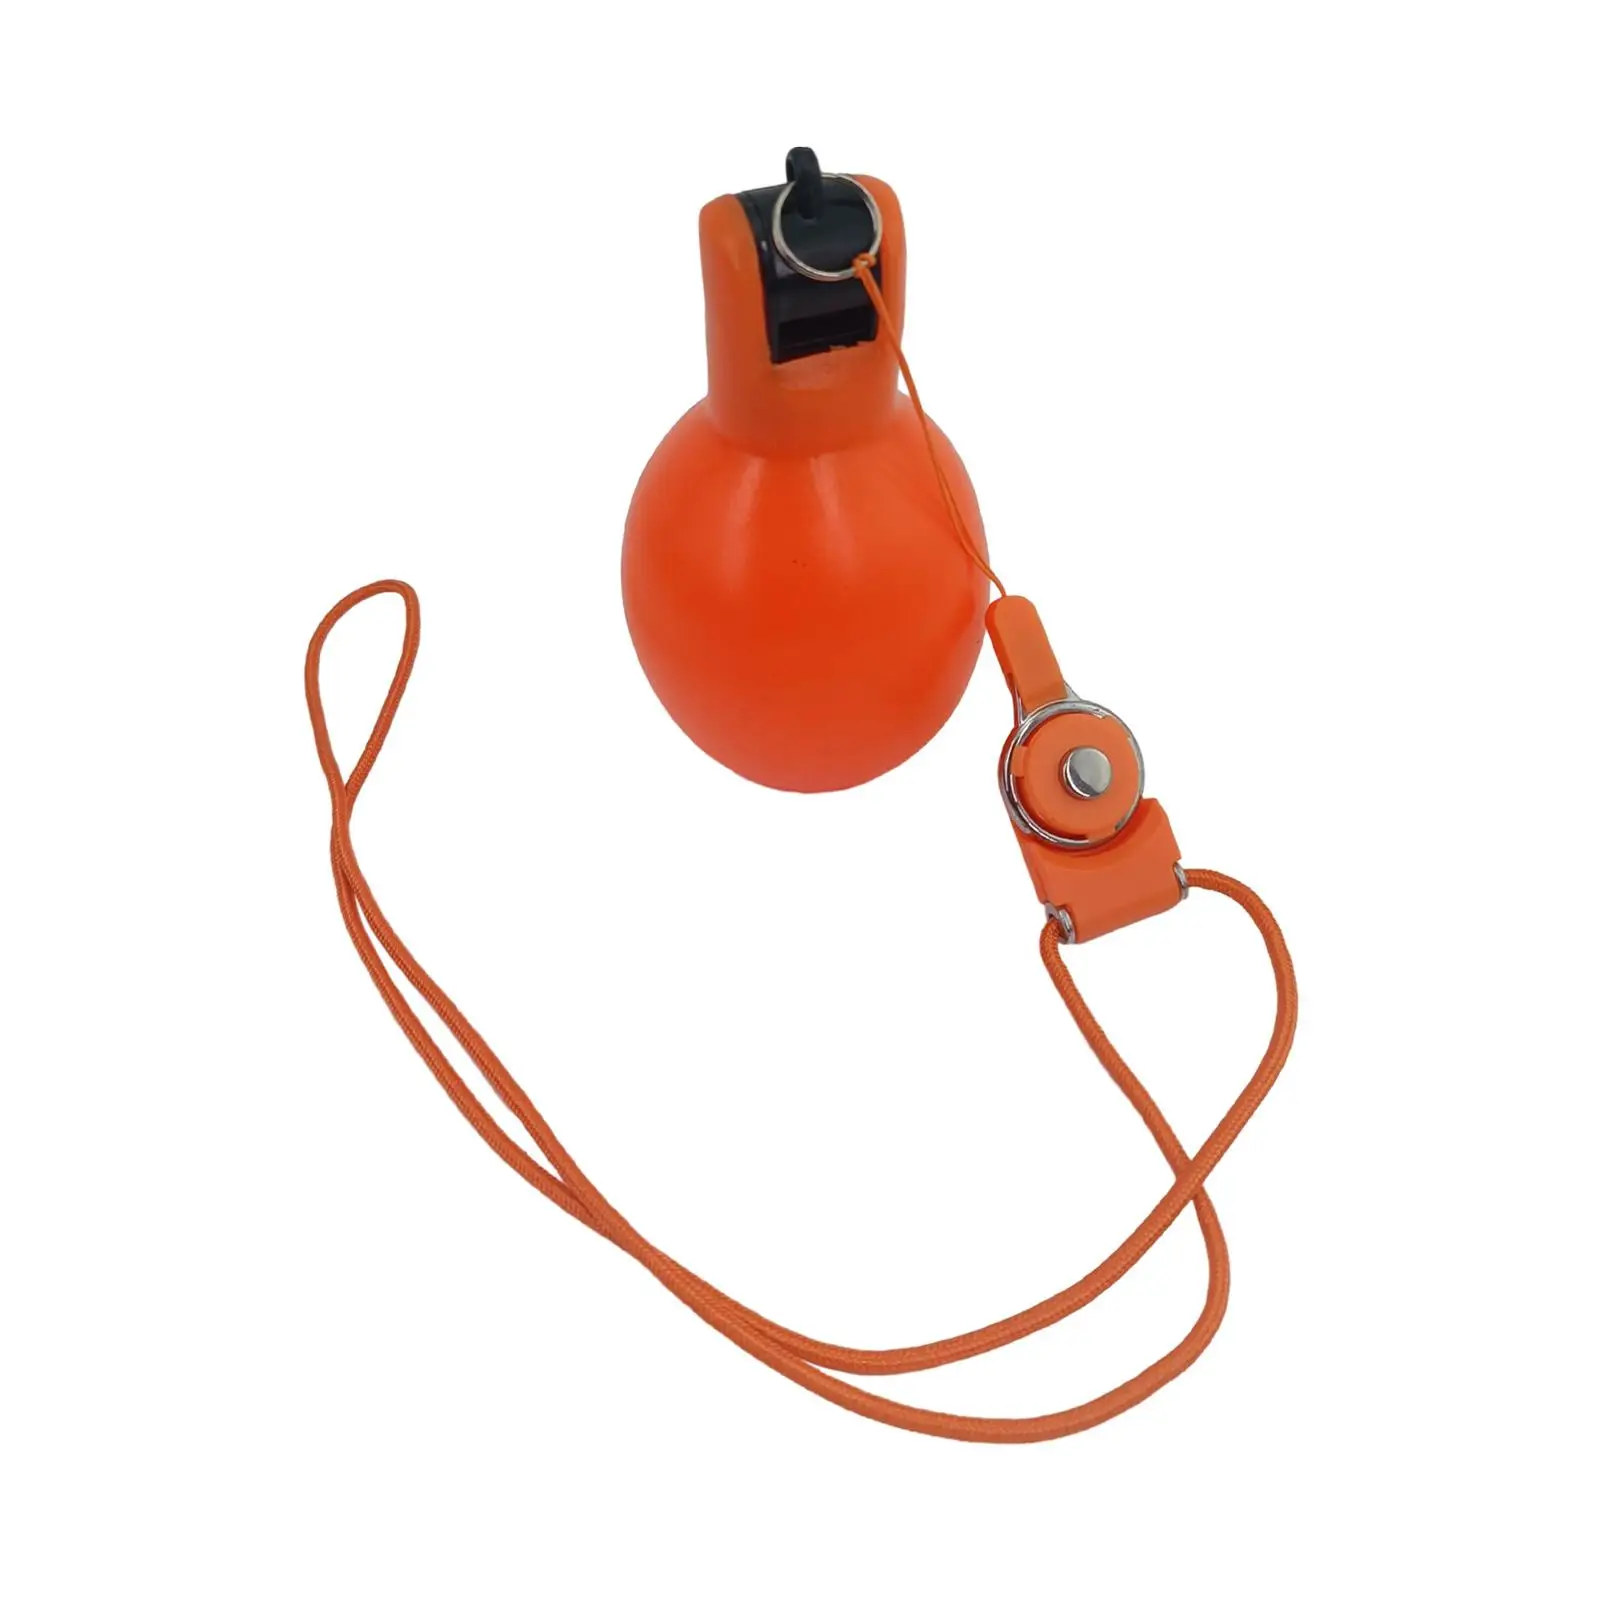 Hand Whistles Portable Handheld Outdoor Sports Whistle Whistle for Hiking Physical Education Games Emergency Camping Trekking